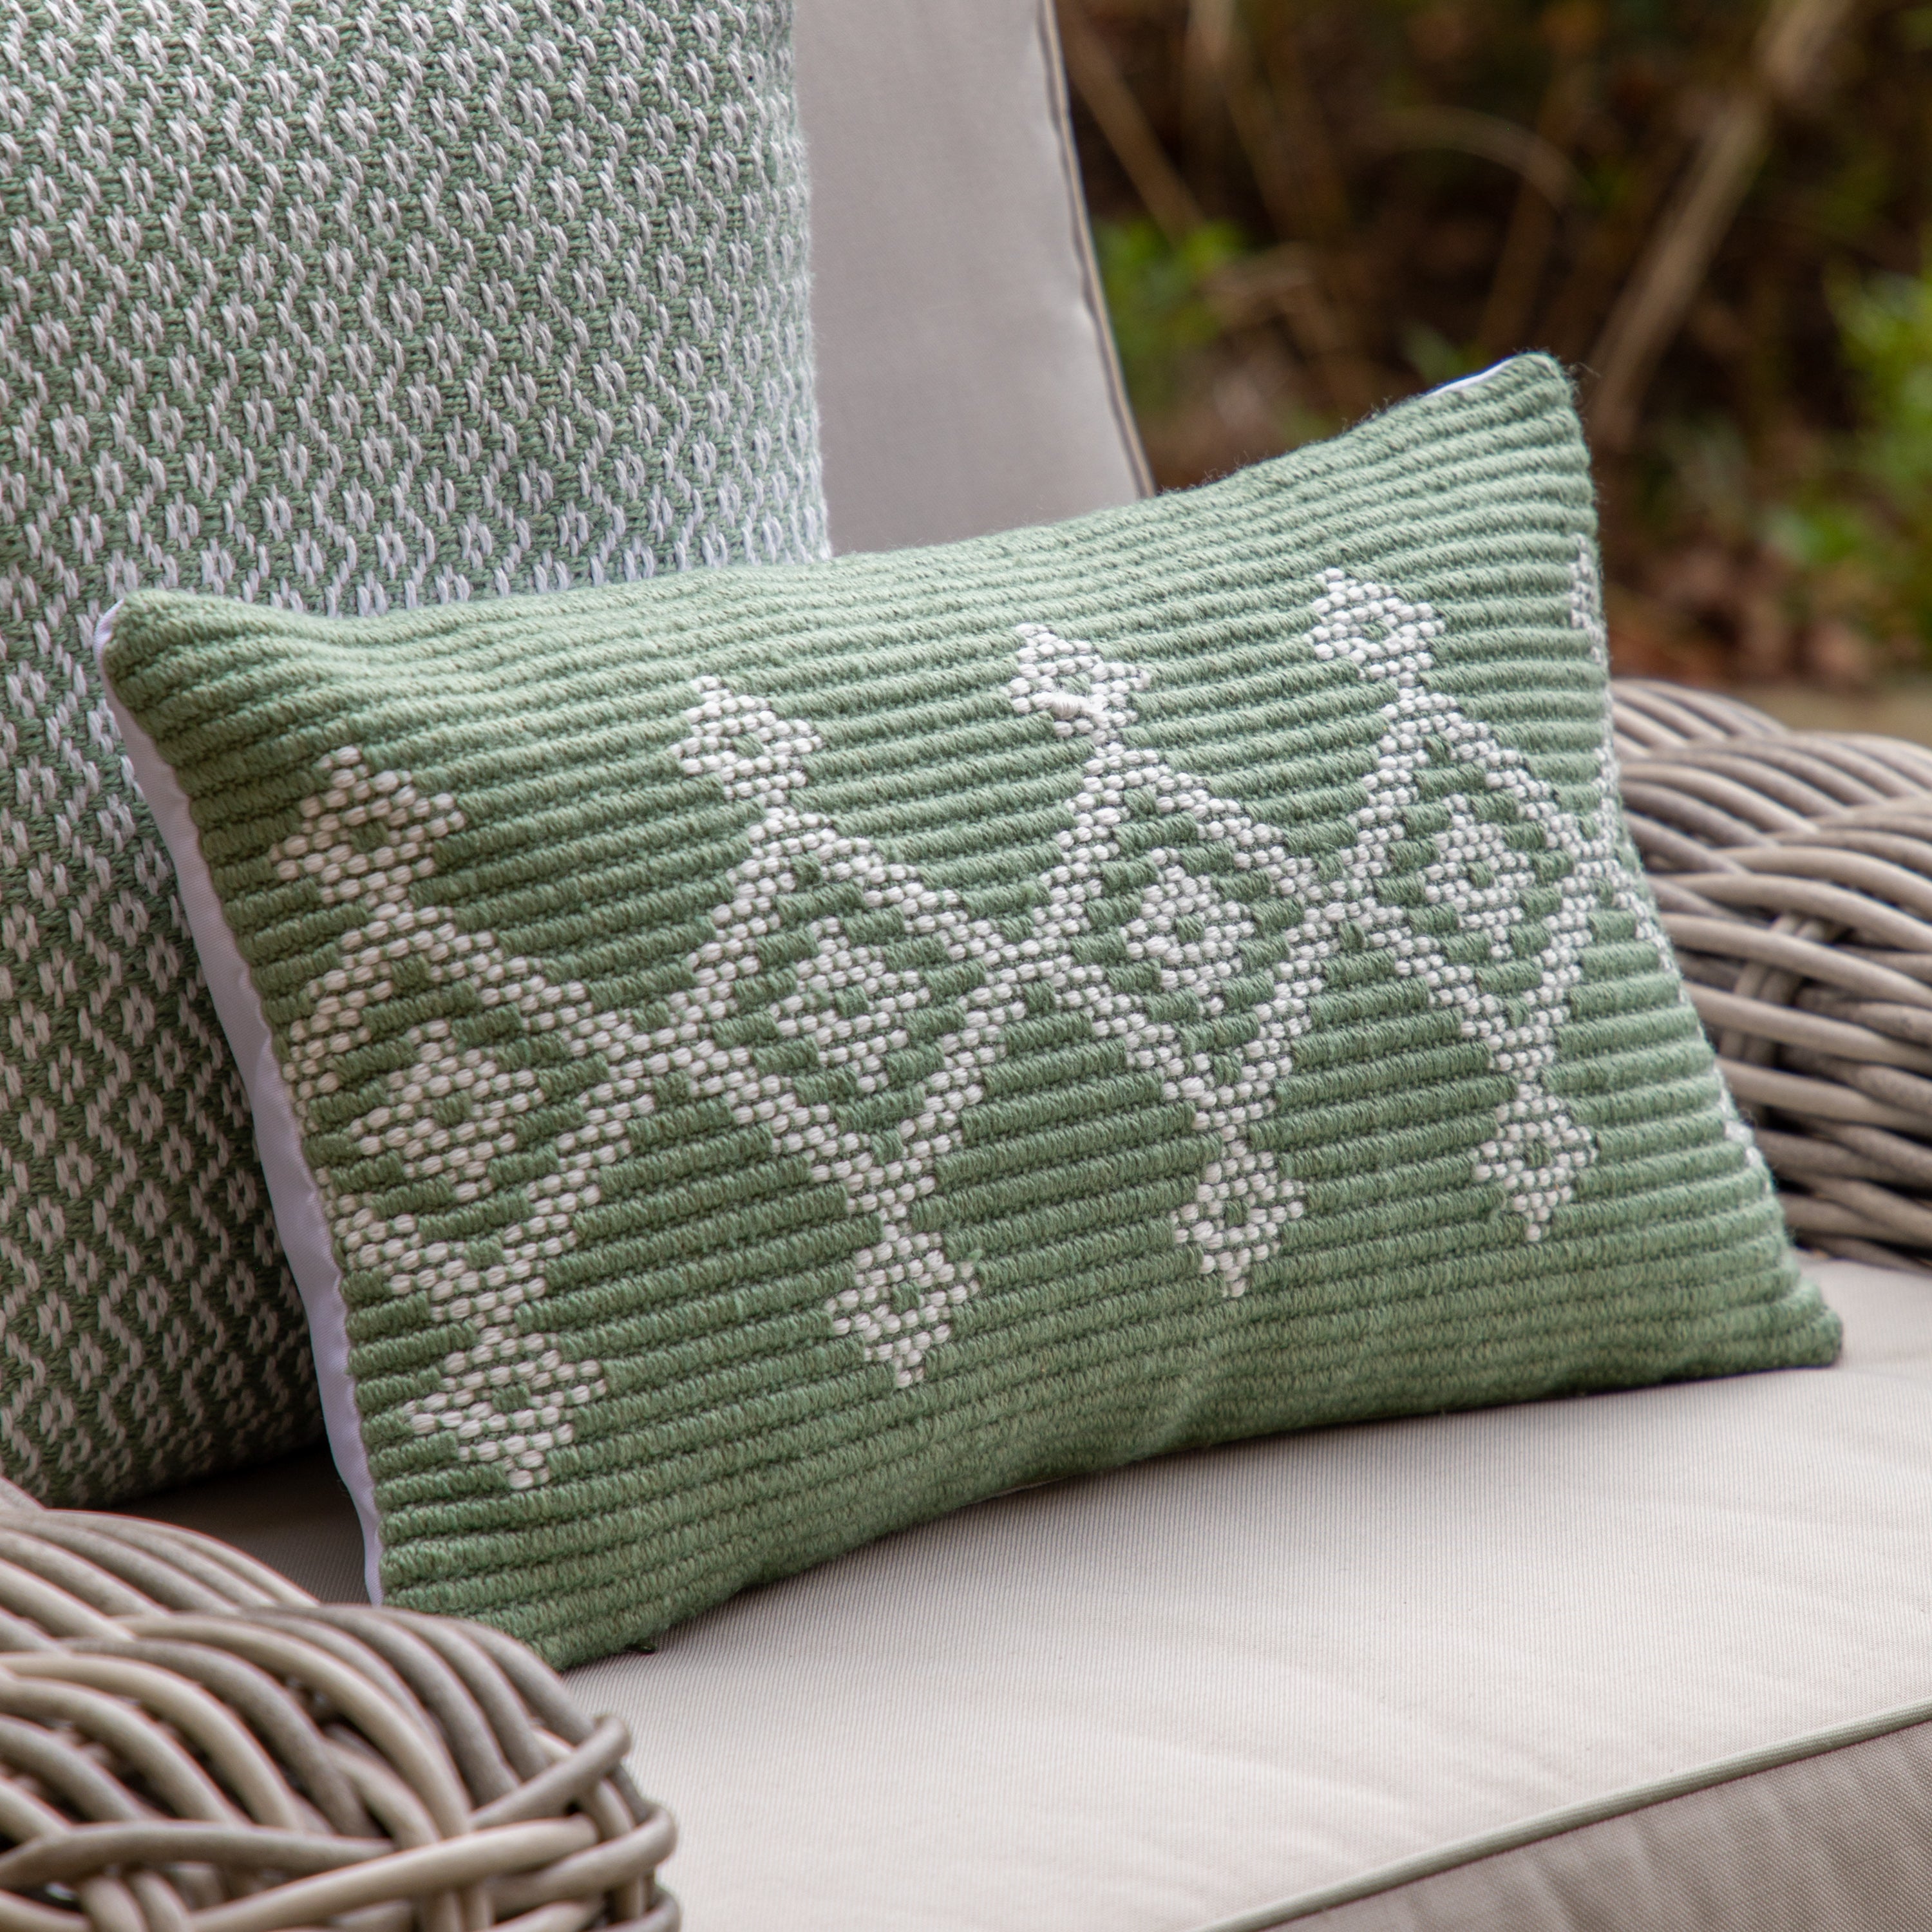 The Pale Green Geometric Pattern Cushion Cover